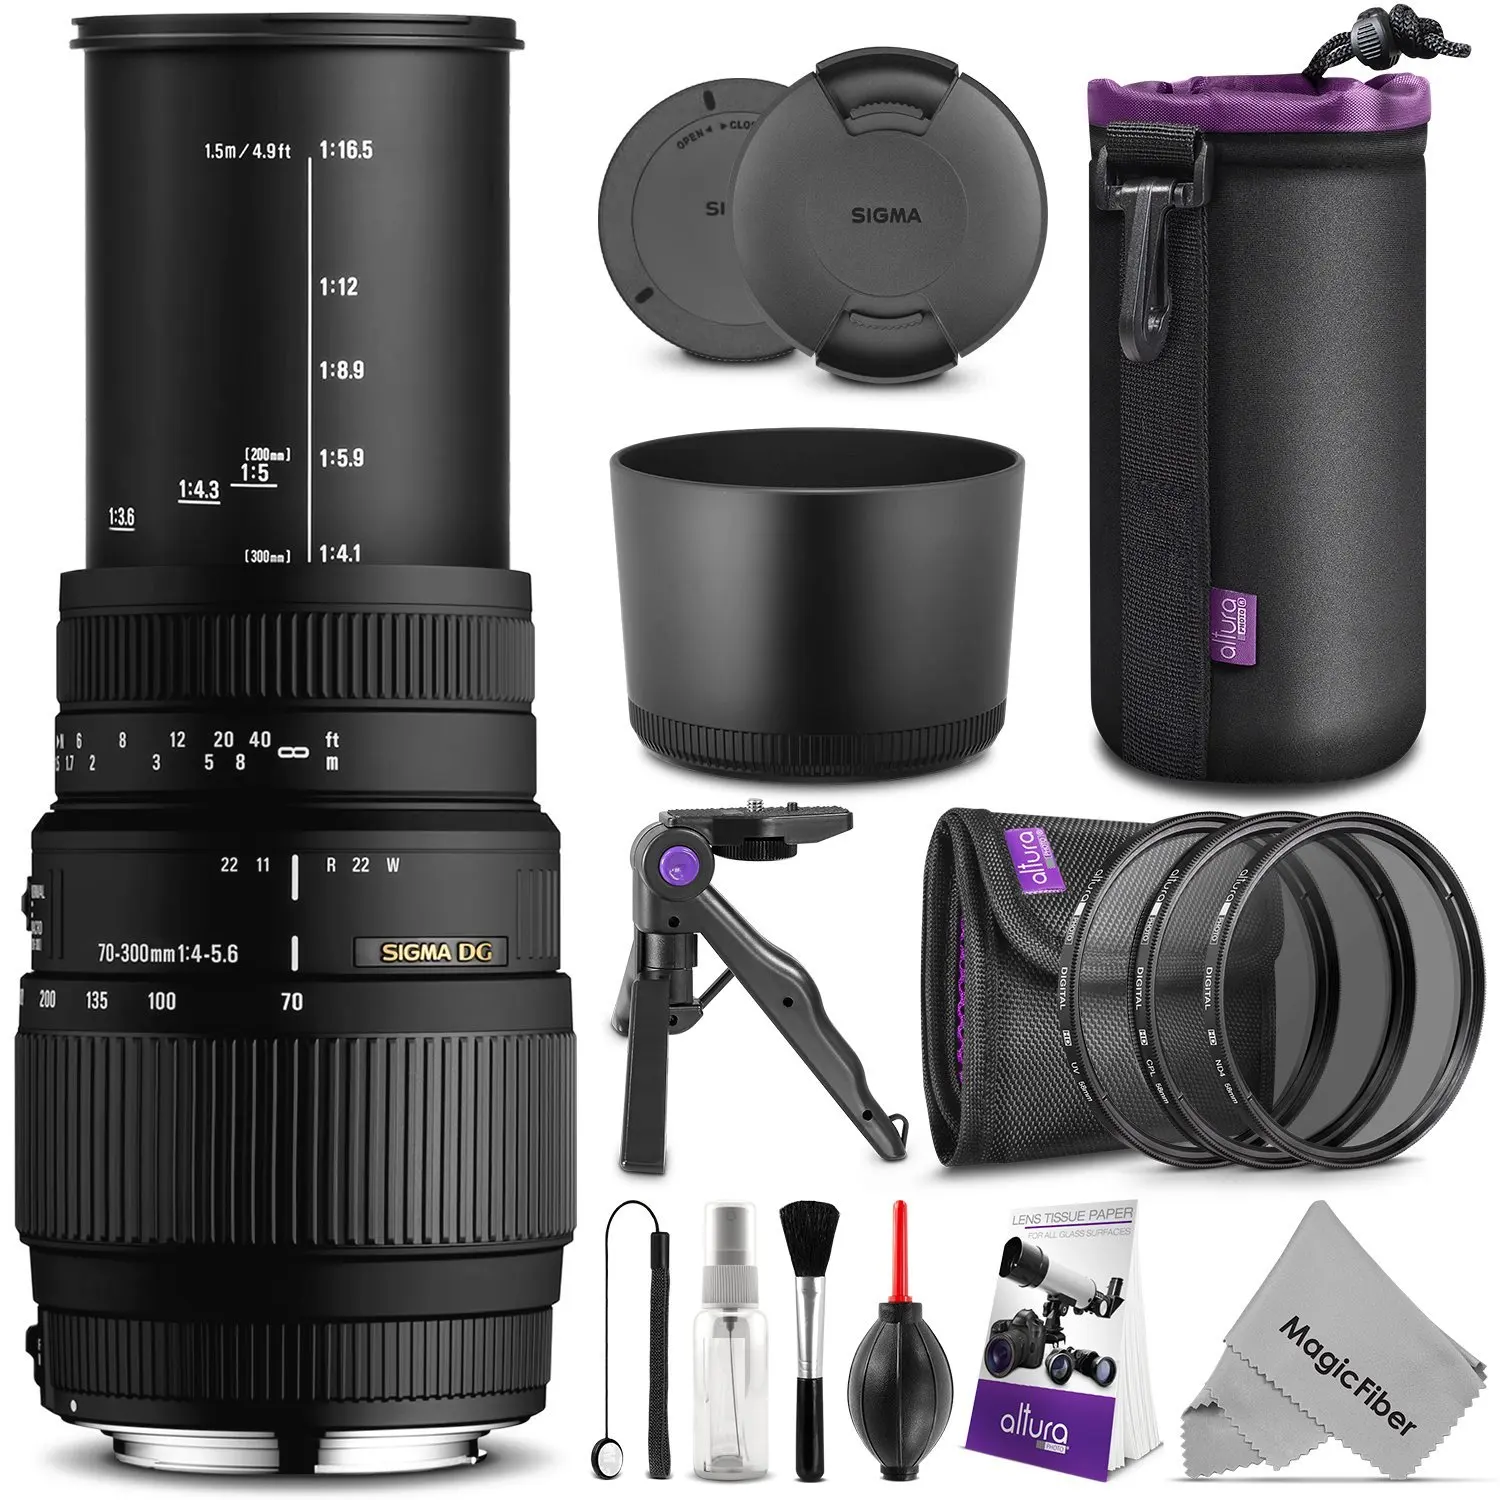 Buy Sigma 70 300mm F 4 5 6 Dg Macro Telephoto Zoom Lens For Specific For The Canon Eos 5d Mark 2 3 Ii Iii 5dm2 5dm3 6d 7d 60 In Cheap Price On Alibaba Com